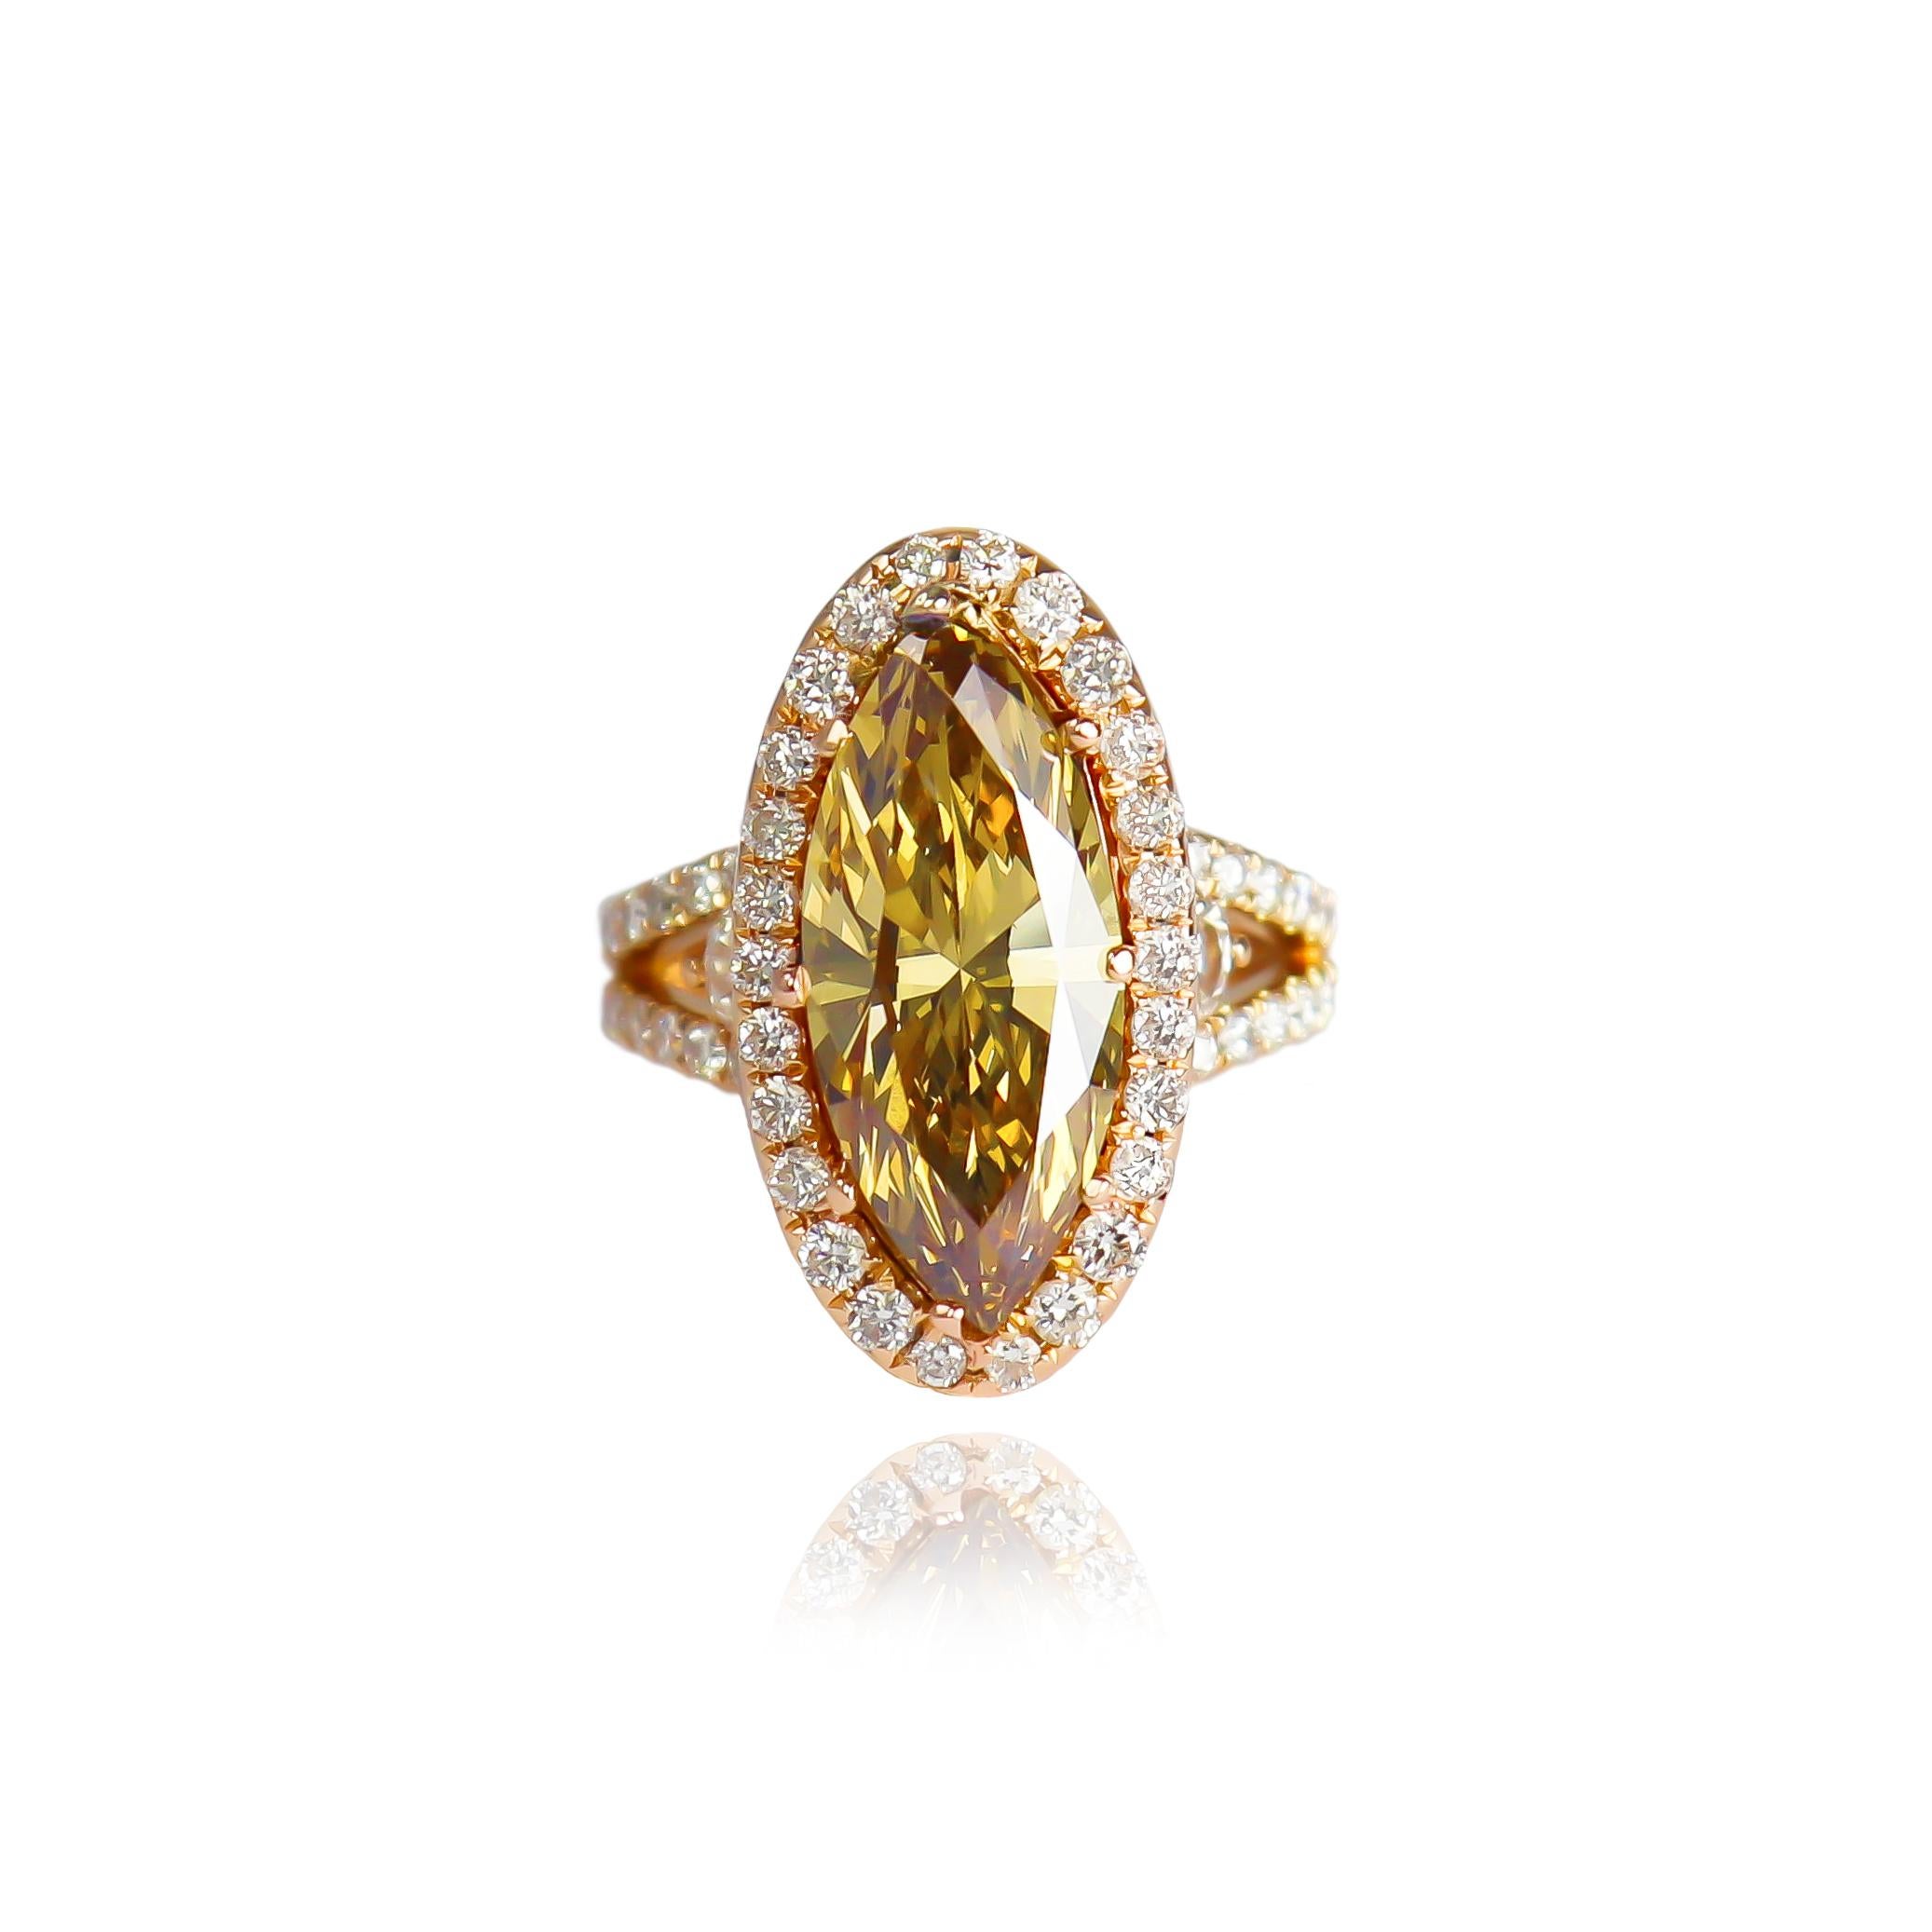 This beautifully detailed ring features a GIA certified 3.82 carat marquise brilliant cut diamond of natural, fancy deep, brownish orangy yellow color and VS1 clarity. Set in a handmade, 18K rose gold ring with diamond details = 1.70 carat total